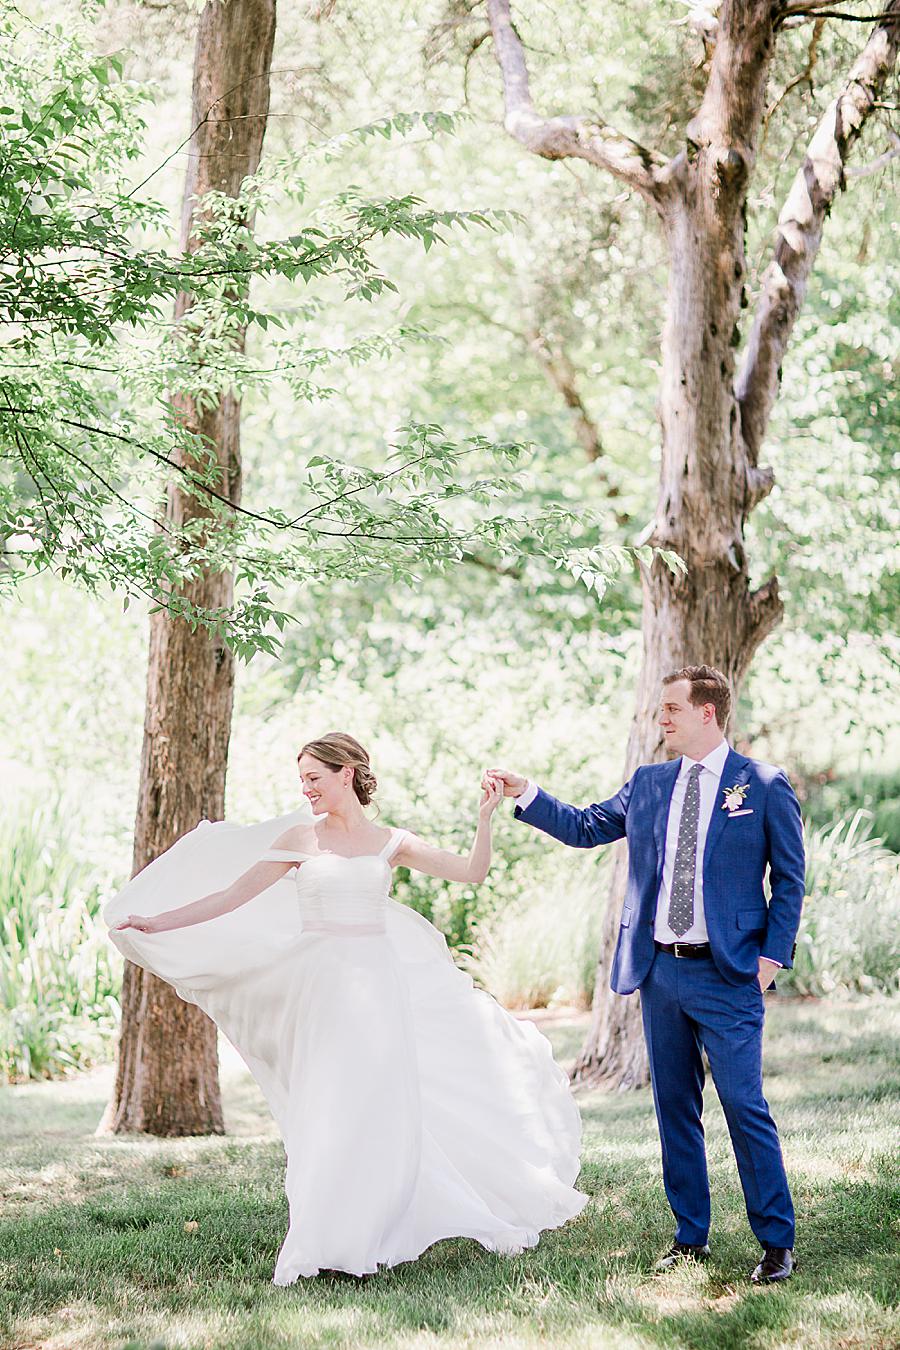 Flowy wedding gown at this Marblegate Farm Wedding by Knoxville Wedding Photographer, Amanda May Photos.